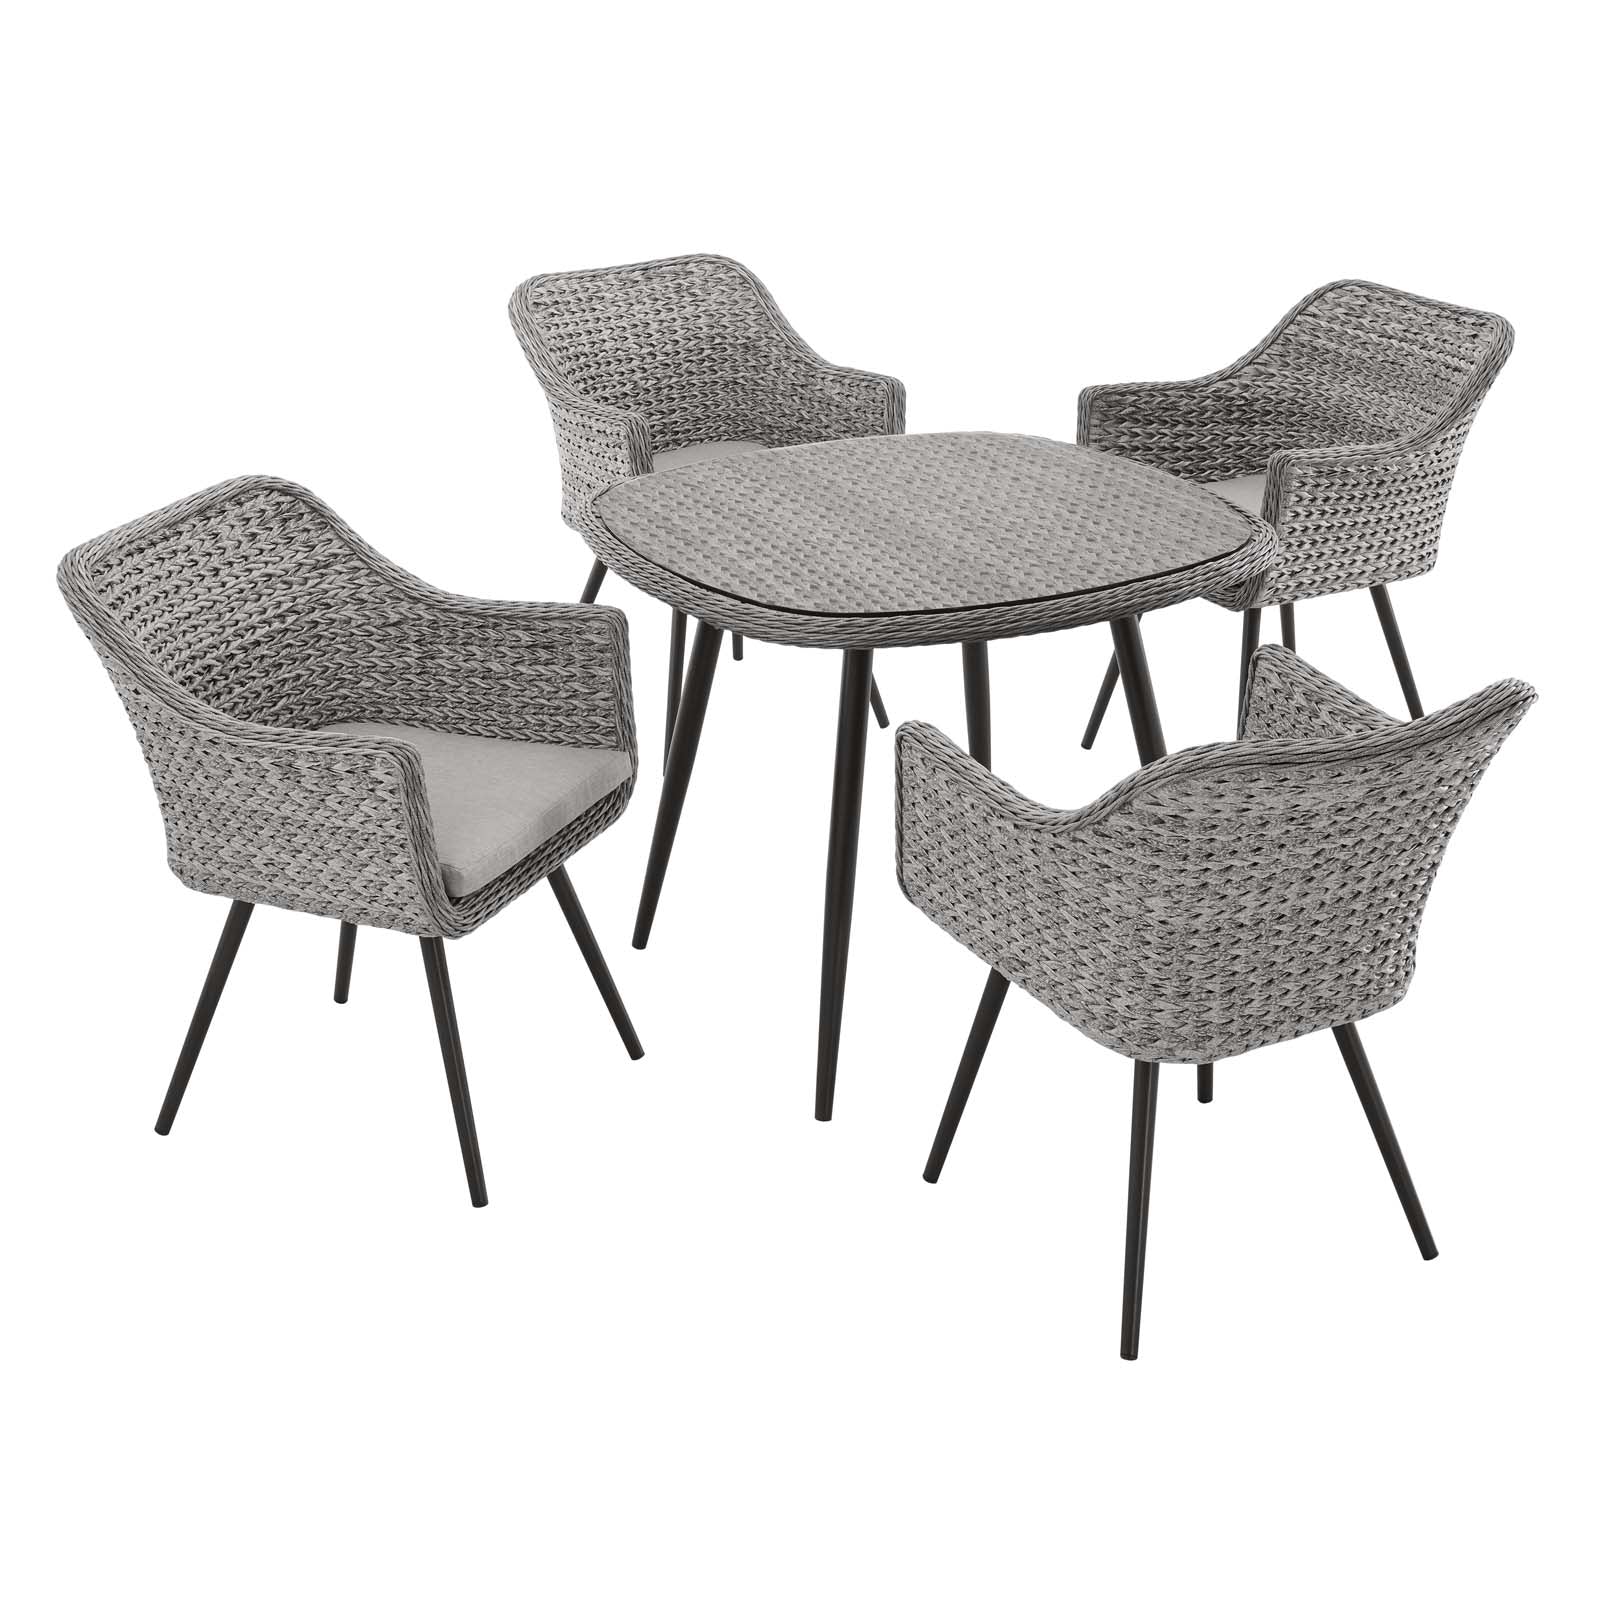 Modway Outdoor Dining Sets - Endeavor 5 Piece Outdoor Patio Wicker Rattan Dining Set Gray